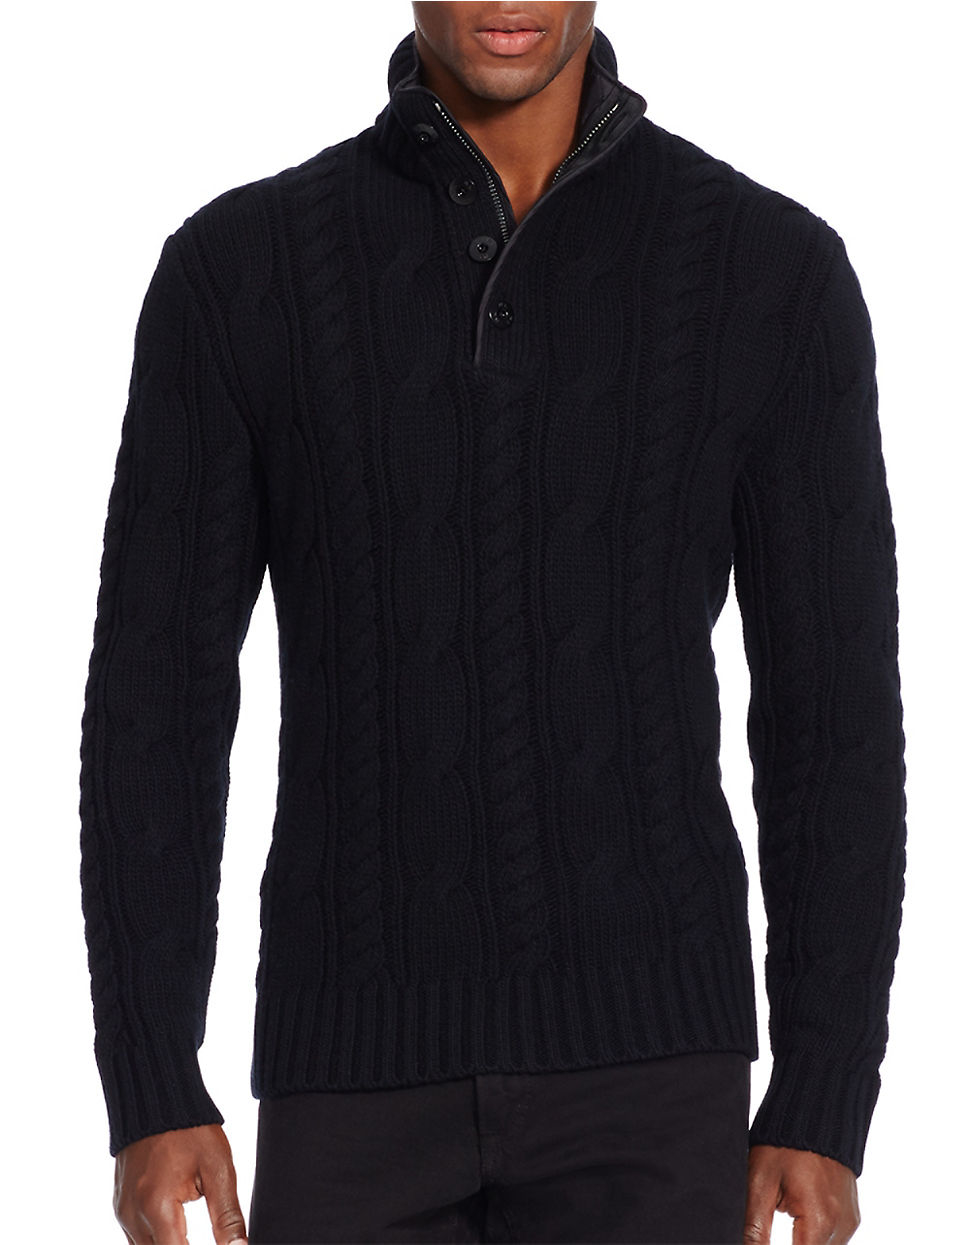 Polo ralph lauren Cable-knit Merino Wool Sweater in Black for Men | Lyst